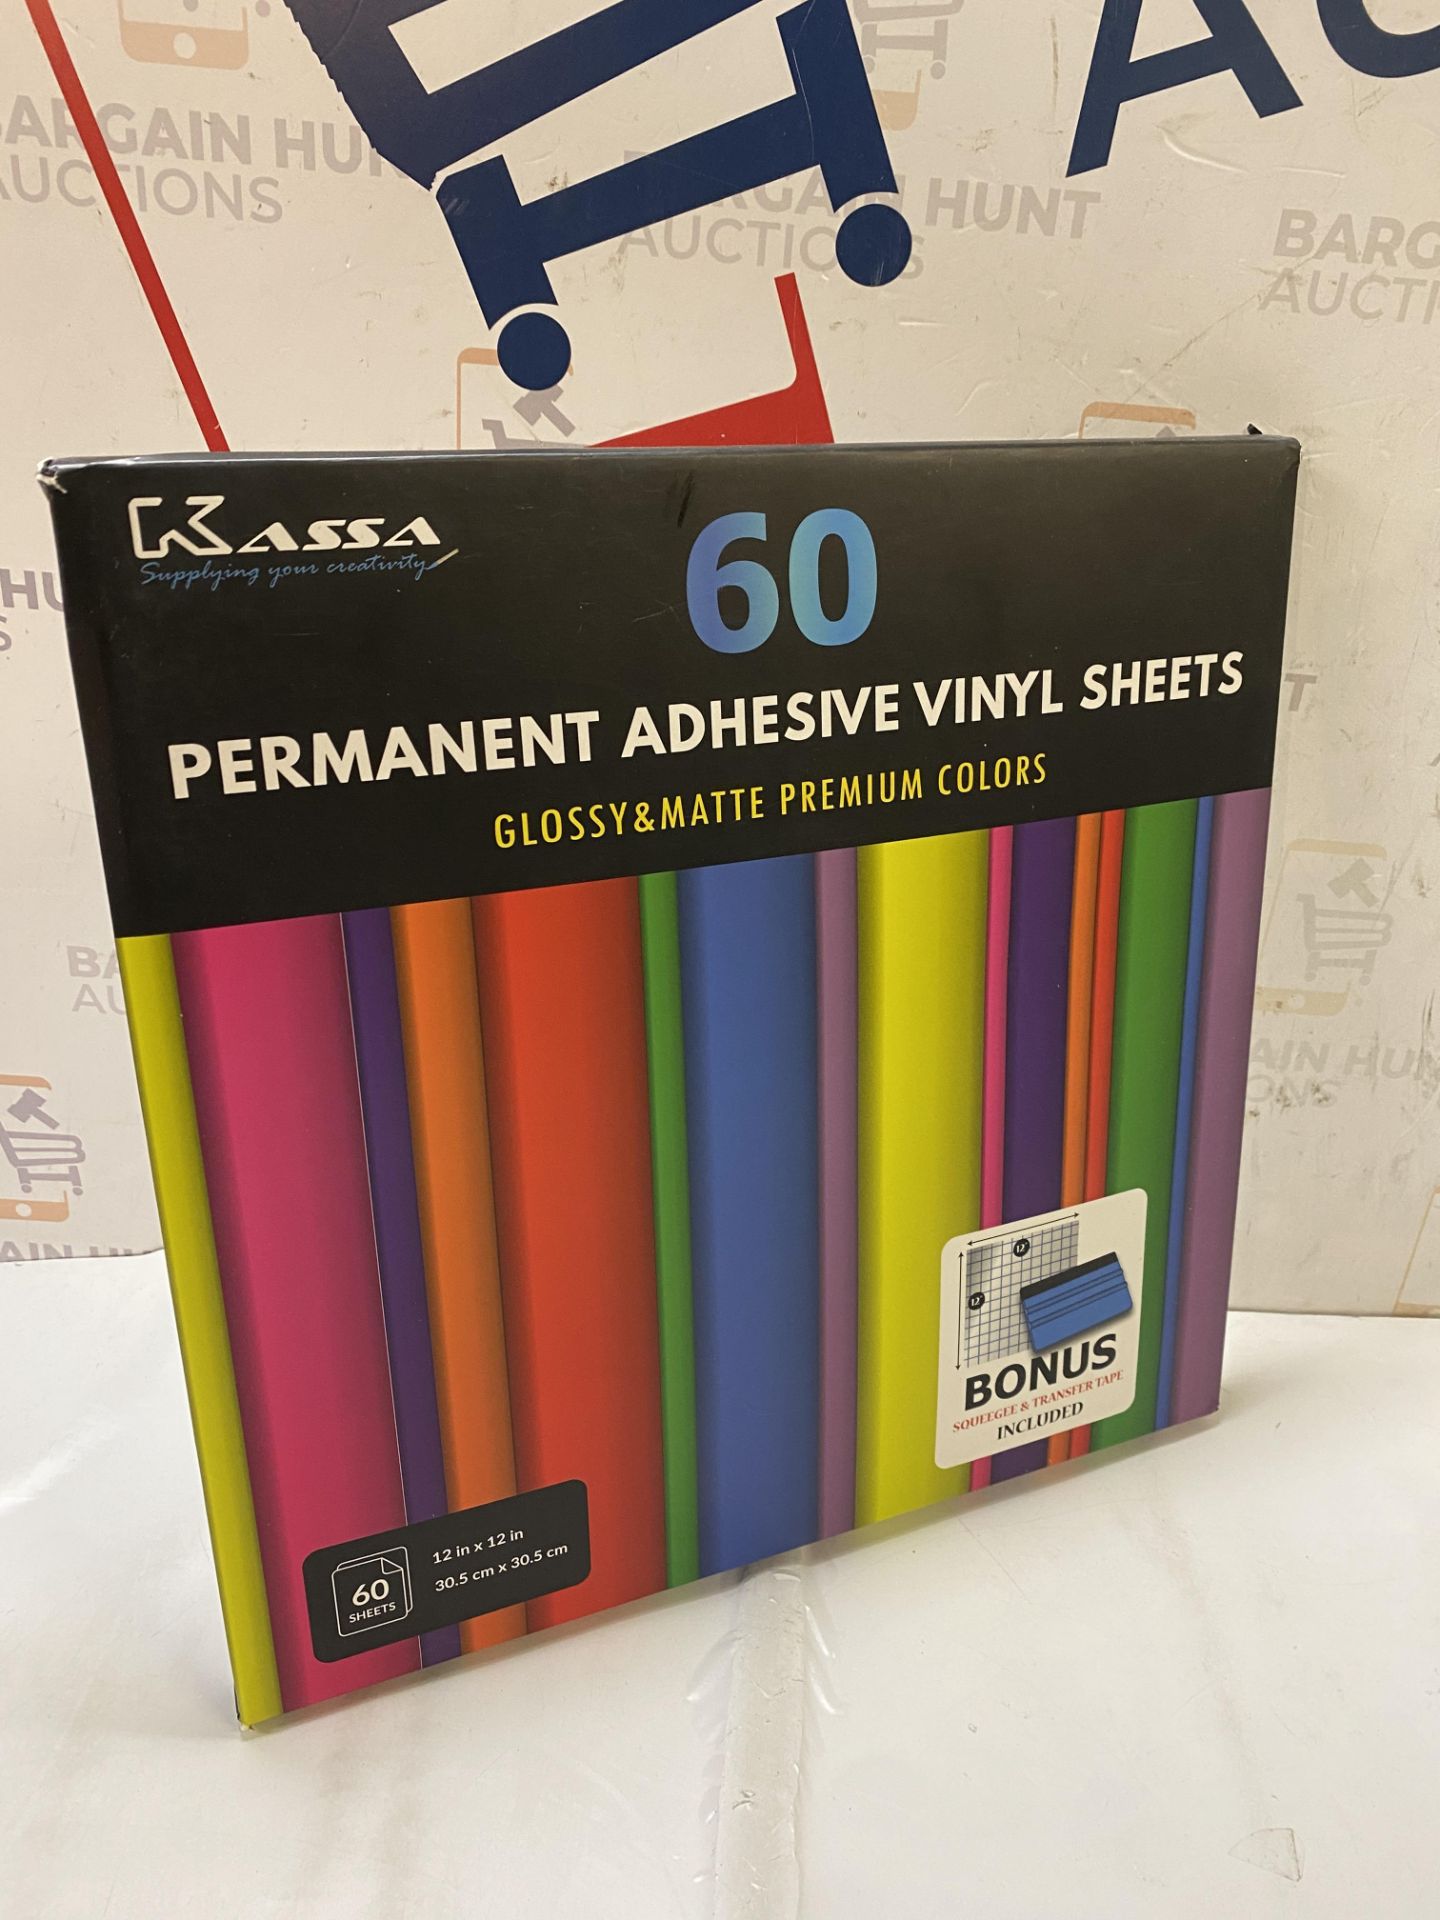 RRP £20.99 Kassa Permanent Adhesive Vinyl Sheets - Bundle of Assorted Colors (Matte & Glossy) - - Image 2 of 2